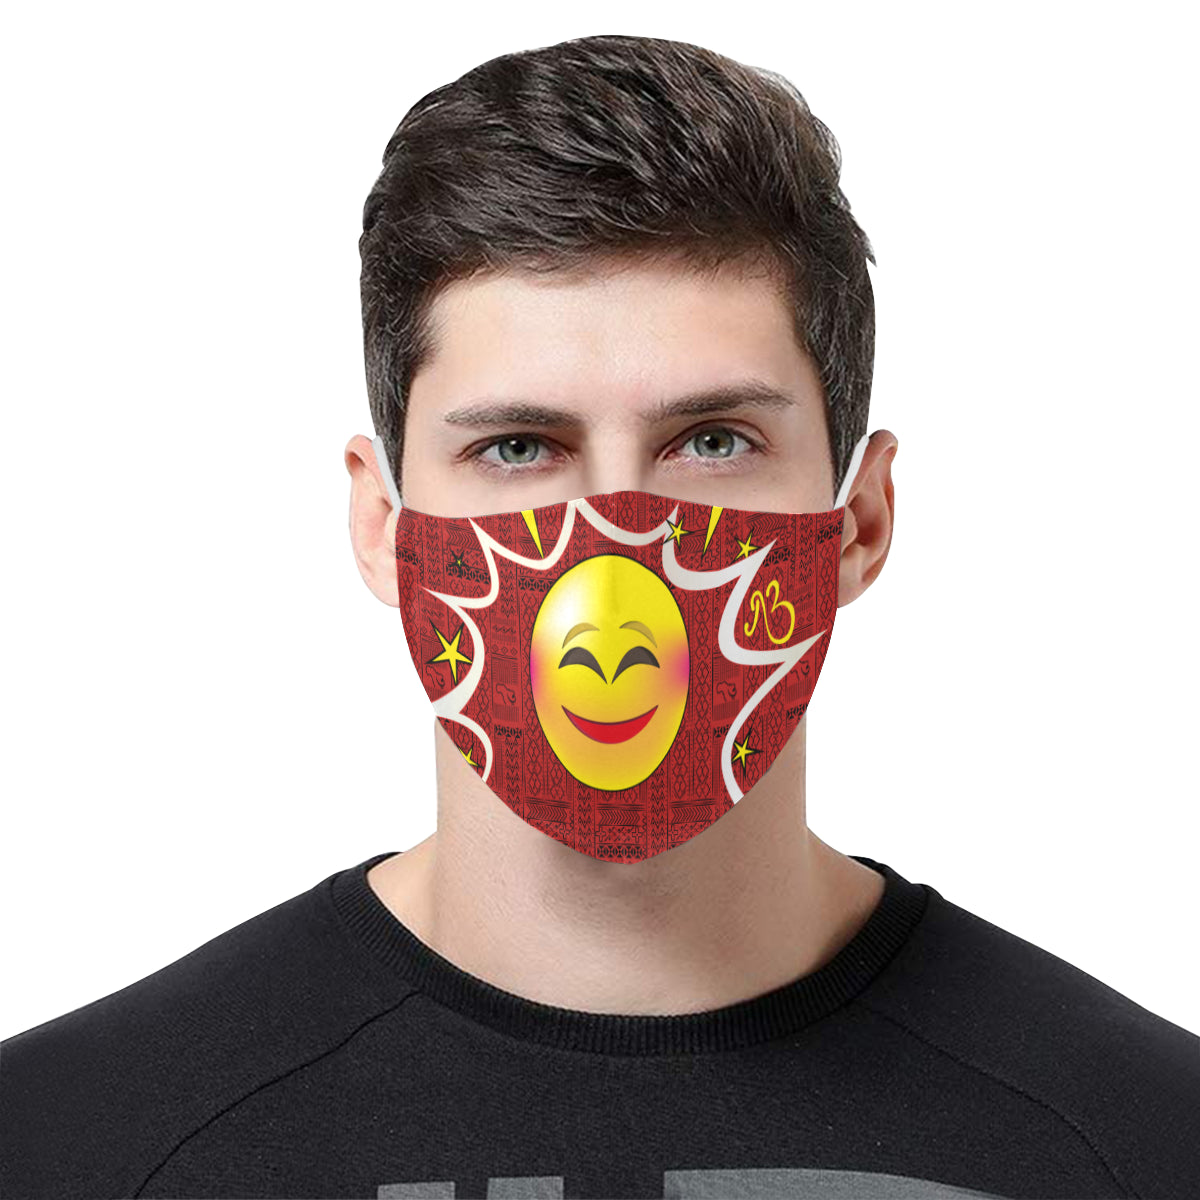 Blushing Tribal Print Comic Emoji Cotton Fabric Face Mask with Filter Slot and Adjustable Strap - Non-medical use (2 Filters Included)